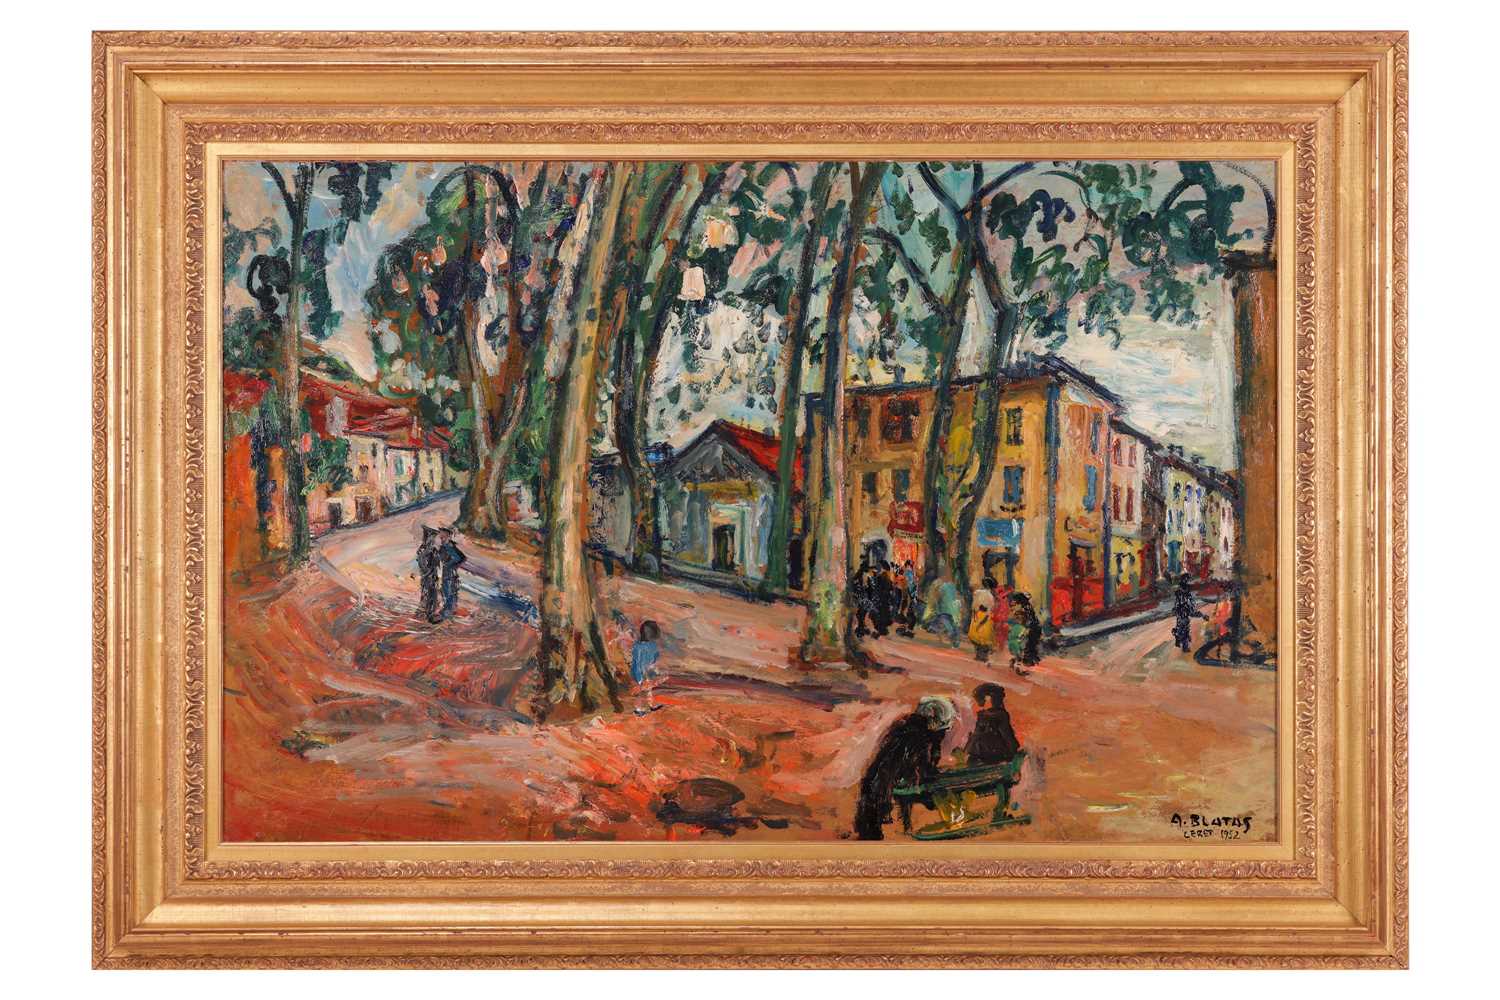 Arbit Blatas (Lithuanian, 1908-1999), Figures in a square at Ceret, signed and dated 'A. Blatas Cere